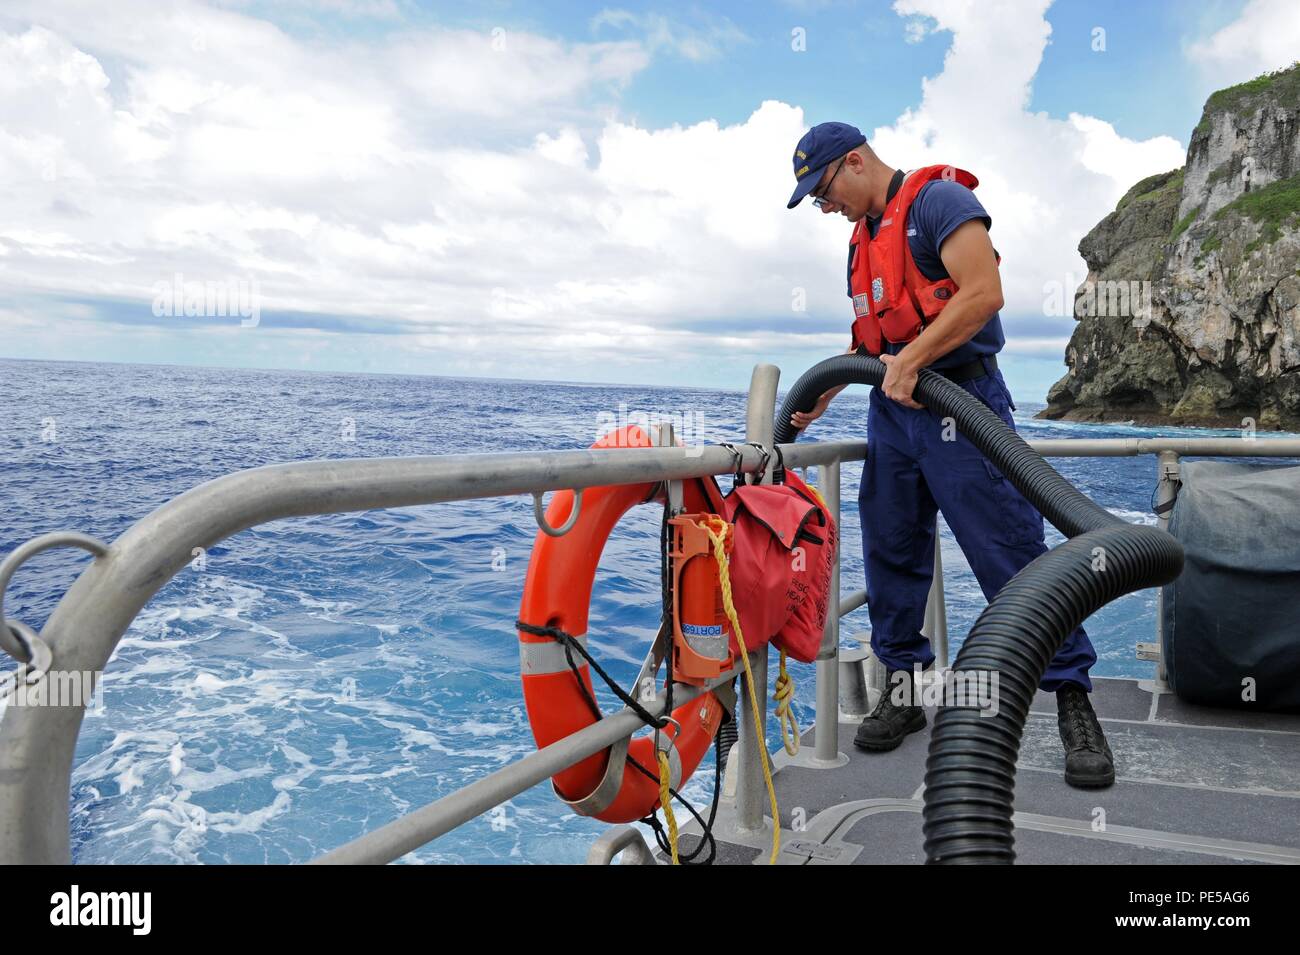 150930-N-ZB122-006 SANTA RITA, GUAM (Sept. 30, 2015) – Off the coast of Naval Base Guam, U.S. Coast Guard  Boatswain's Mate 3rd Class John Jordan-Bertucci demonstrates how to use the hose of a Honda de-watering portable pump (p-6) used for removing excess water on boats, Sept. 30. Based on Naval Base Guam, the U.S. Coast Guard Apra Harbor's primary missions here include search and rescue, law enforcement and protecting of living marine resources and critical infrastructures in and under the water. (U.S. Navy photo by Mass Communication Specialist 2nd Class Chelsy Alamina/Released) Stock Photo